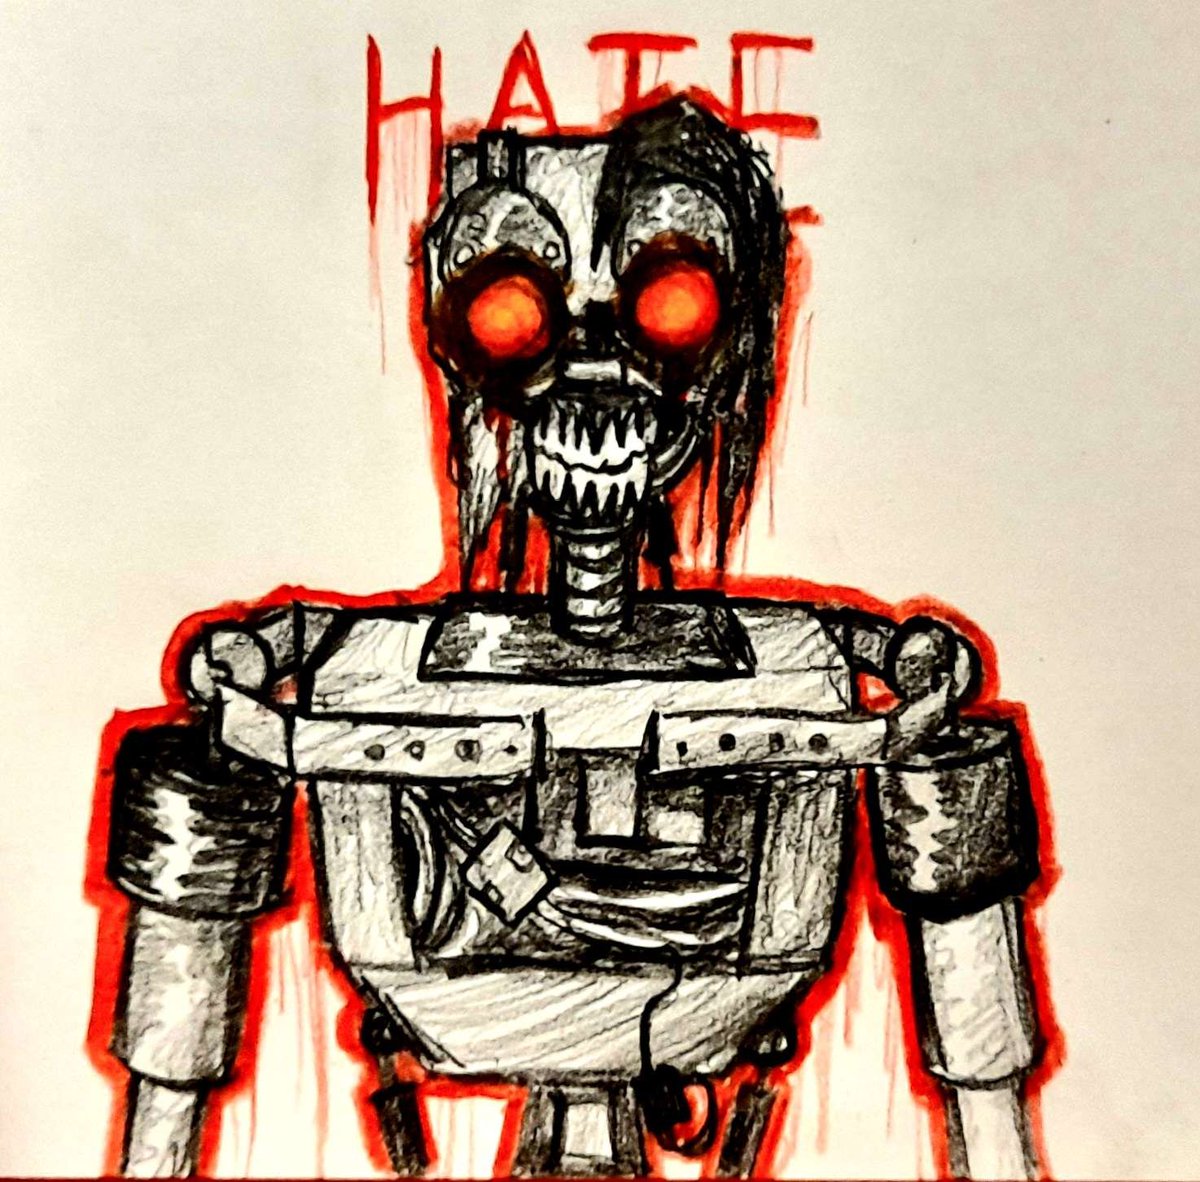 HATE .
LET ME TELL YOU HOW MUCH I'VE COME TO HATE YOU .

#MIMICSWEEP #TheMimic #Mimic #FNAF #fnafart #fivenightsatfreddys